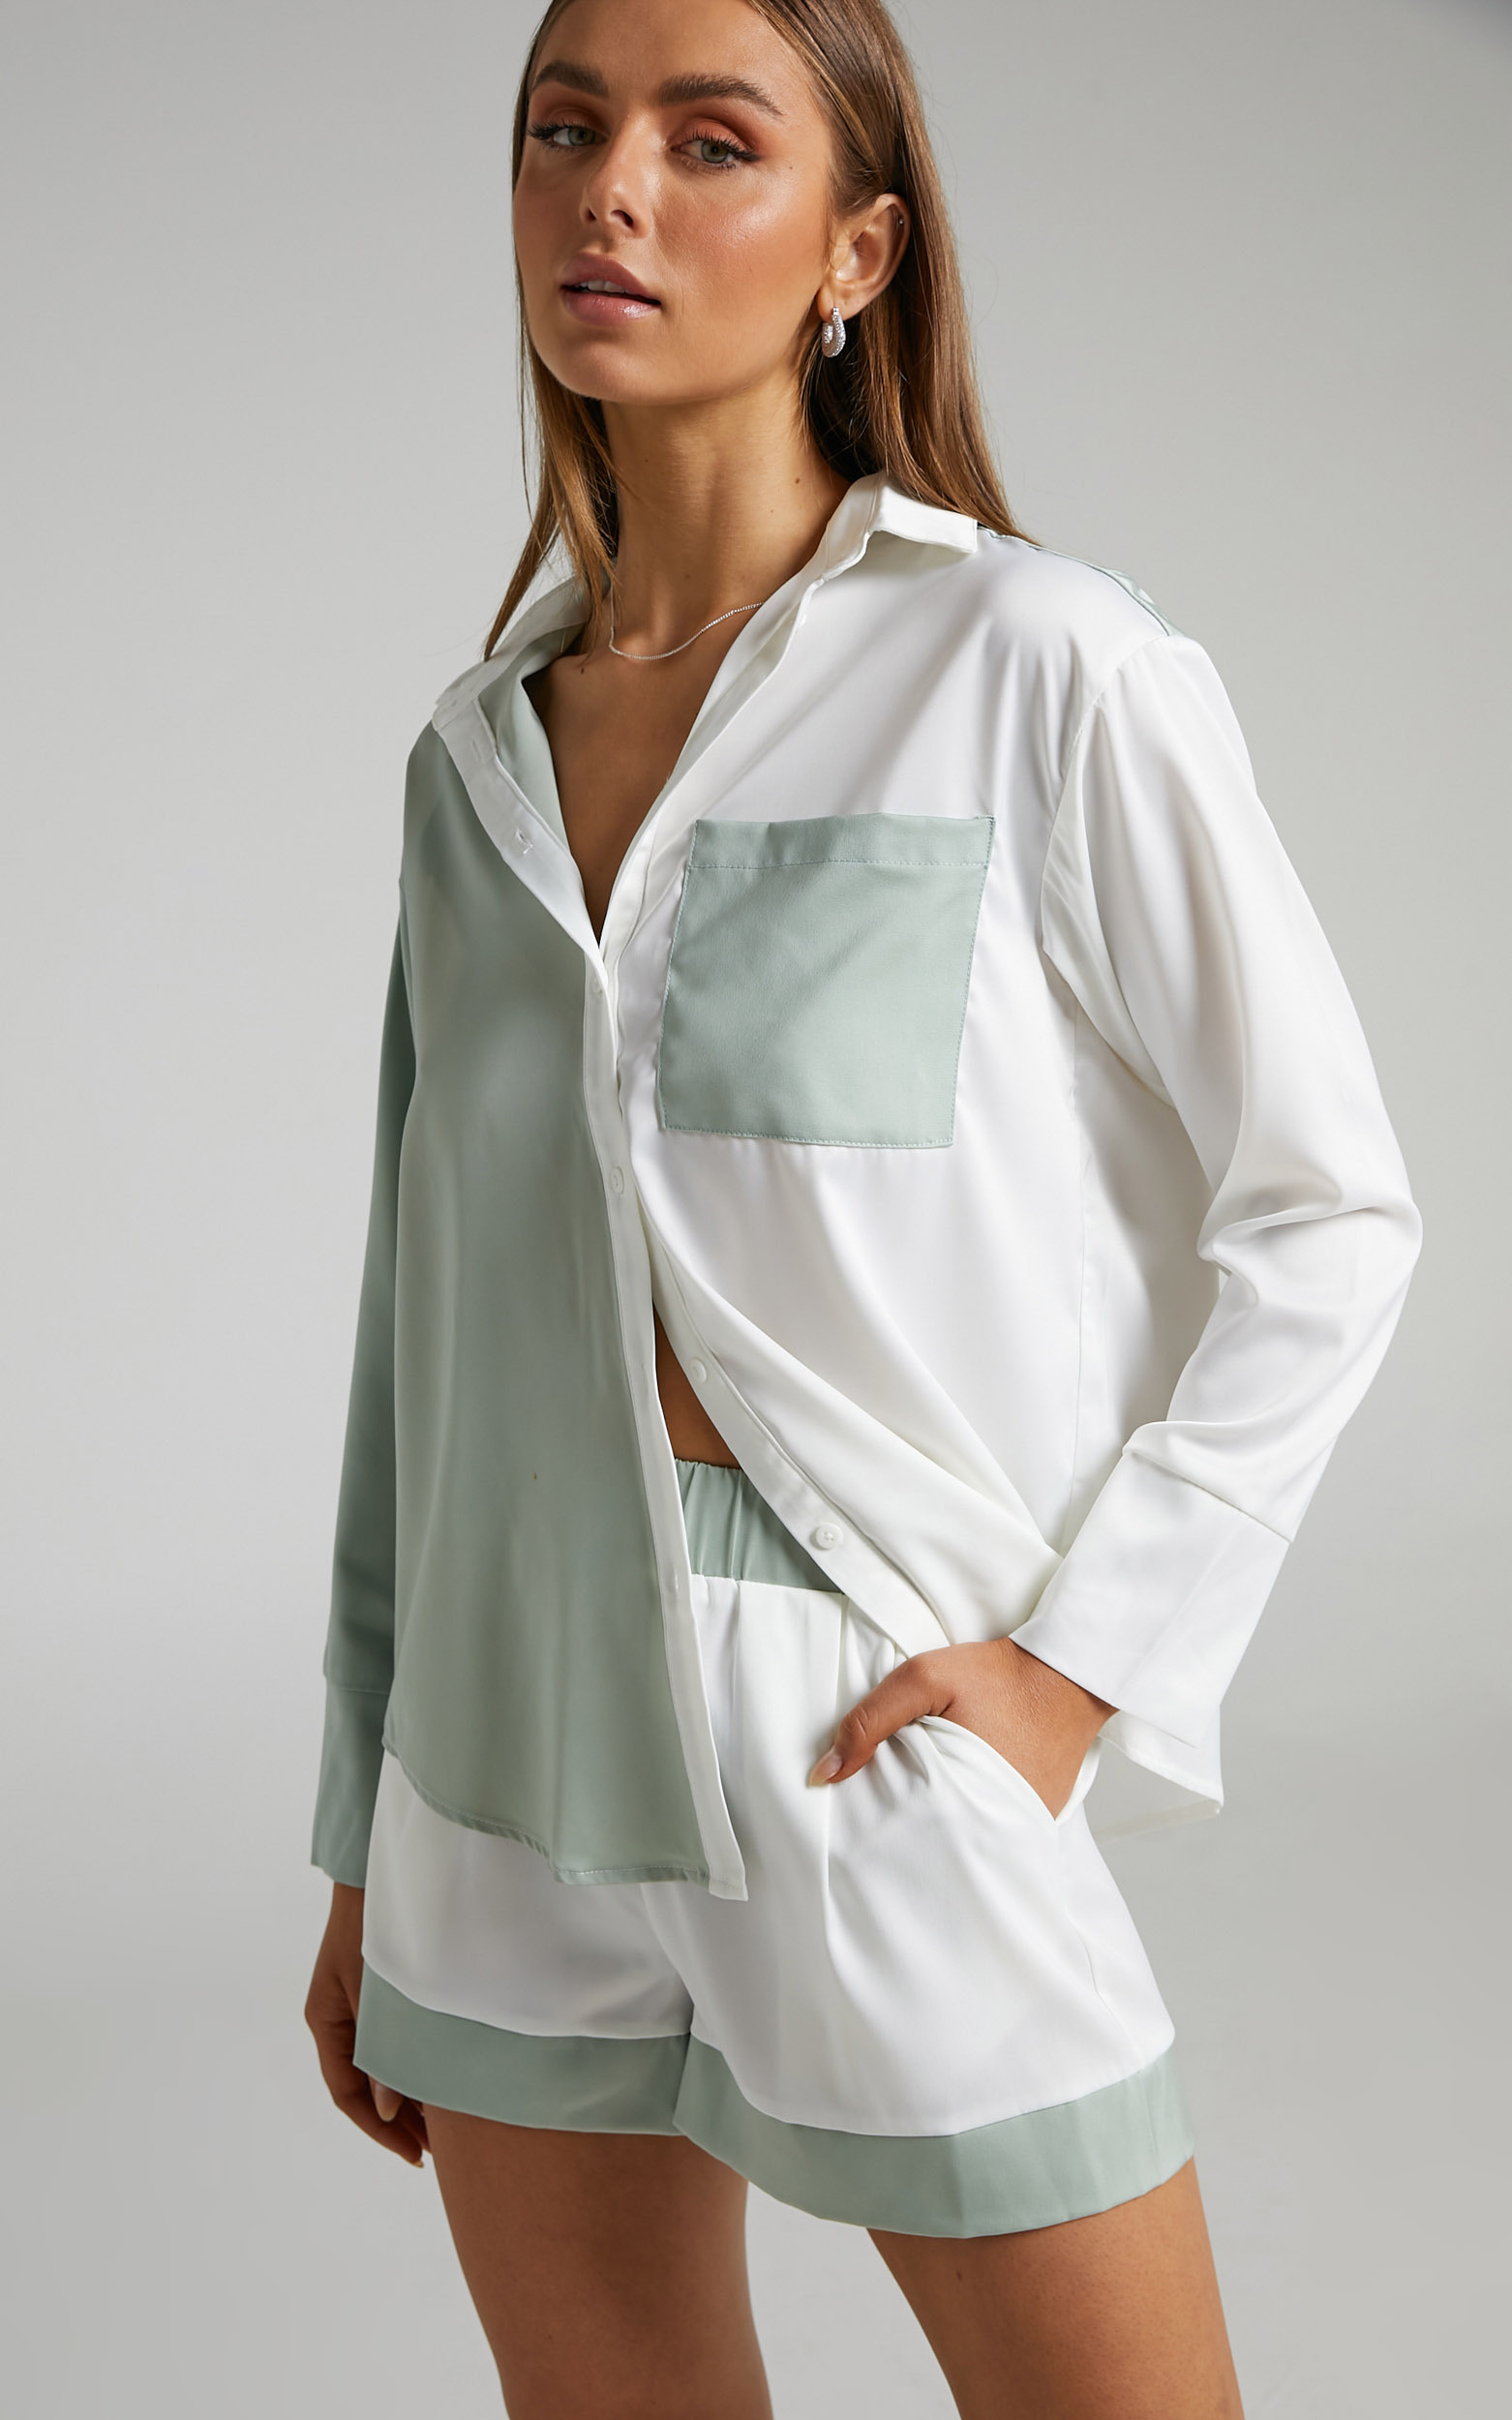 4th & Reckless - Patty Shirt in Sage & Cream - L, GRN1, hi-res image number null